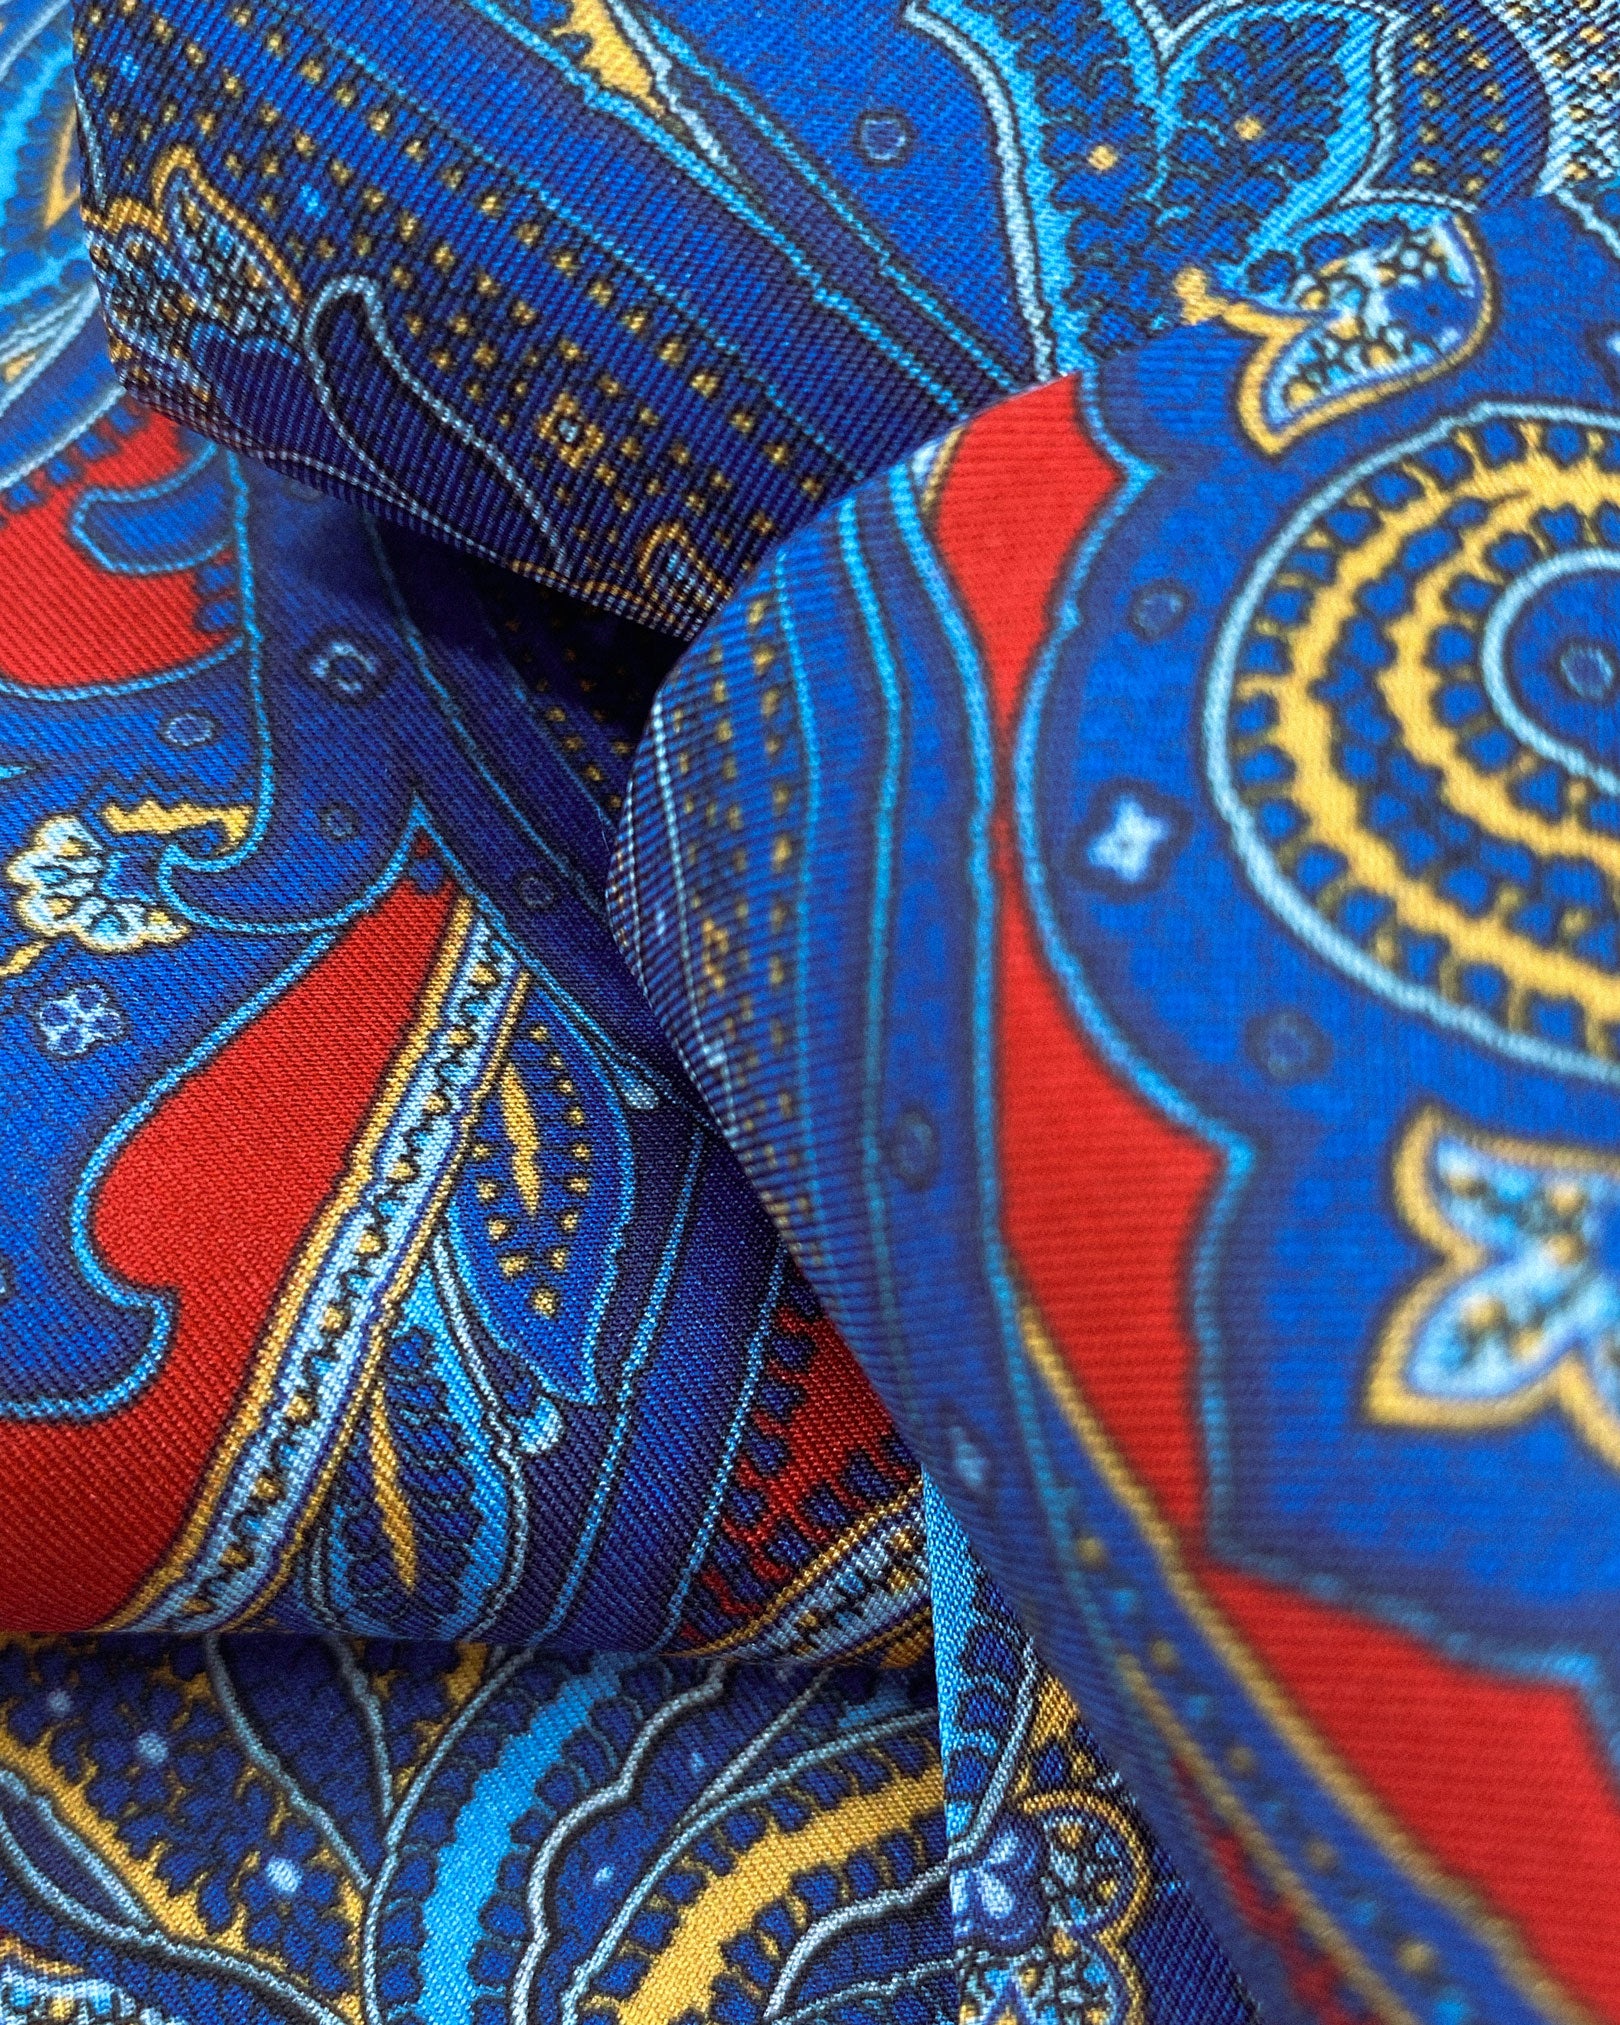 Ruffled close-up view of the Oxford silk scarf, presenting a closer view of the intricate swirls of blue and red paisley and appealing lustre of the material.